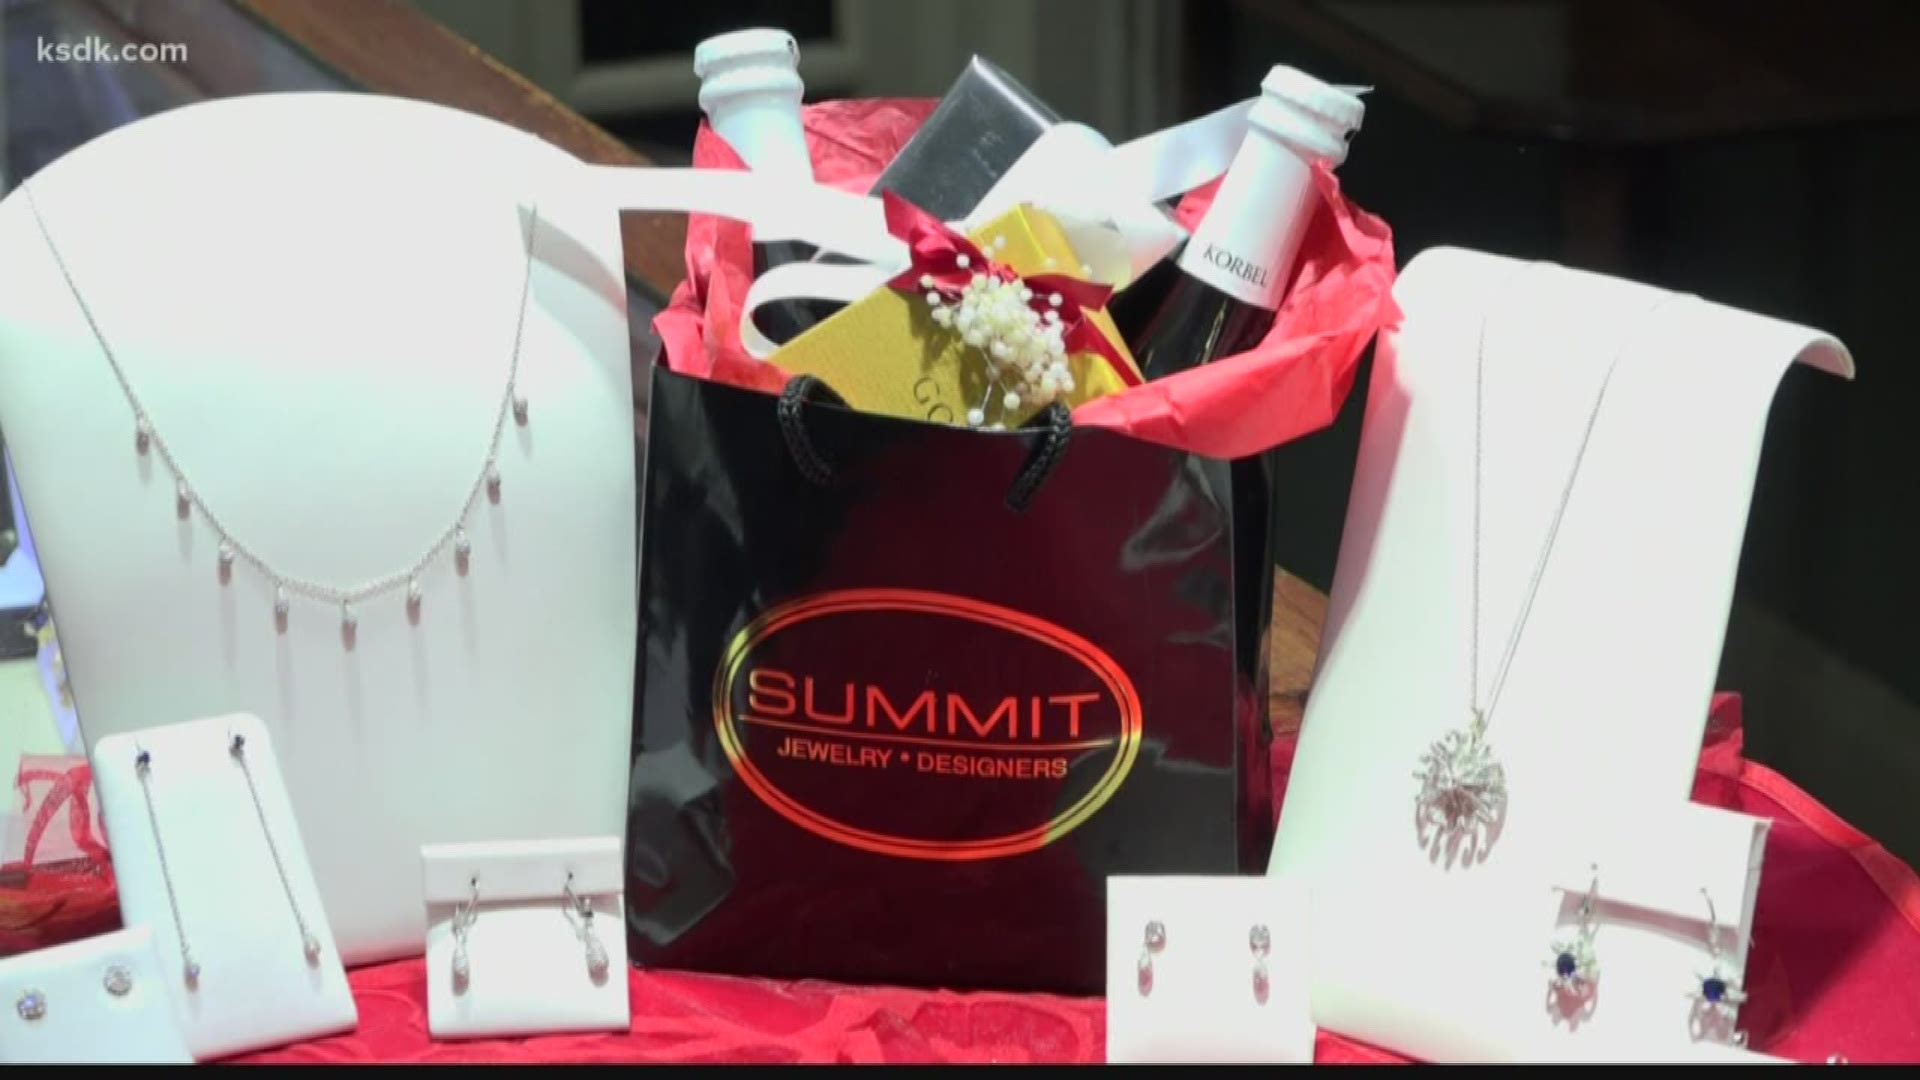 Stop in at Summit Jewelers to get some bling for your Valentine.